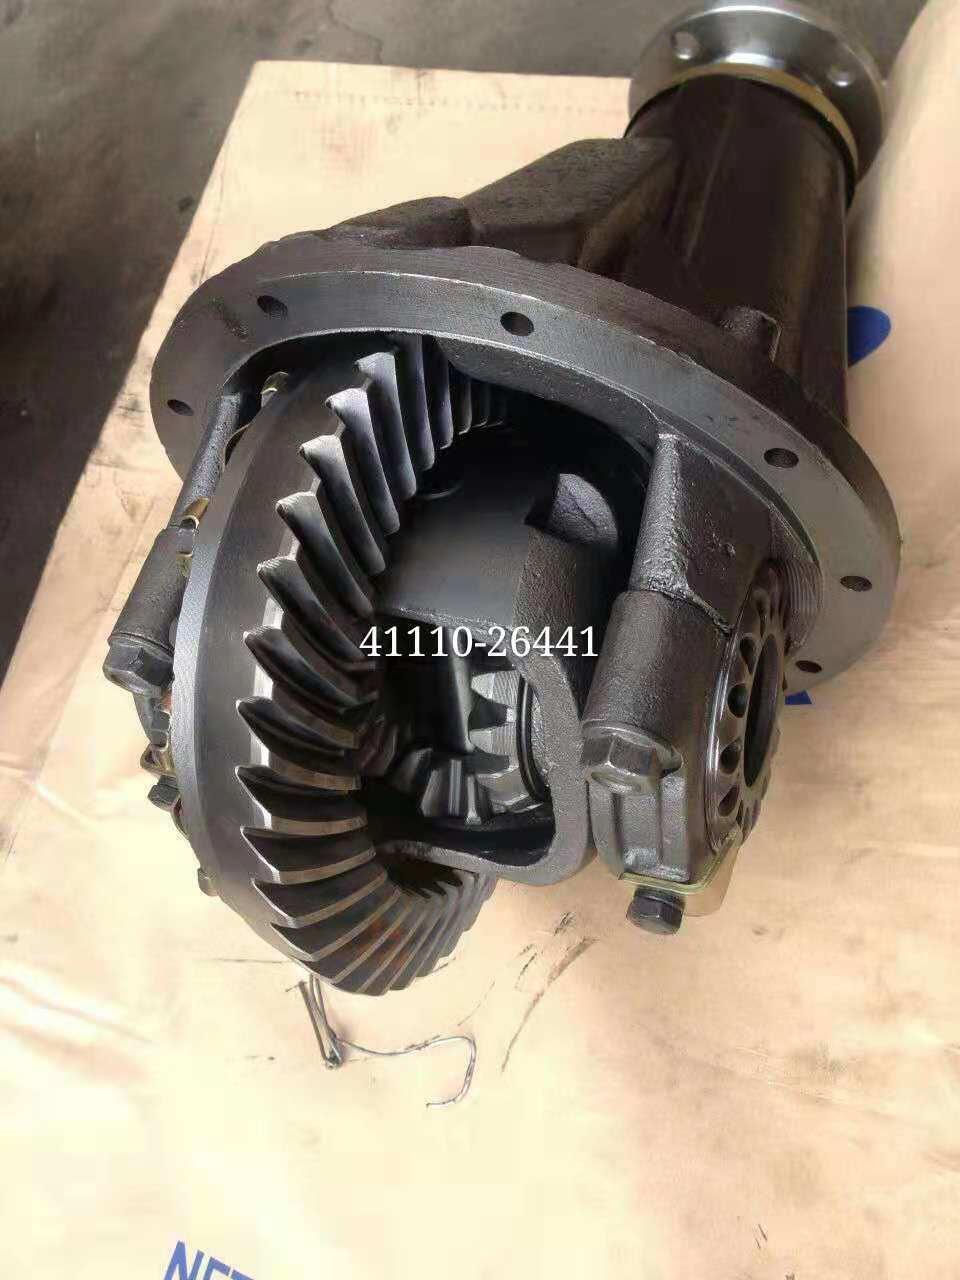 Differential for Toyota 22r Hiace Ratio 4.87 8: 39